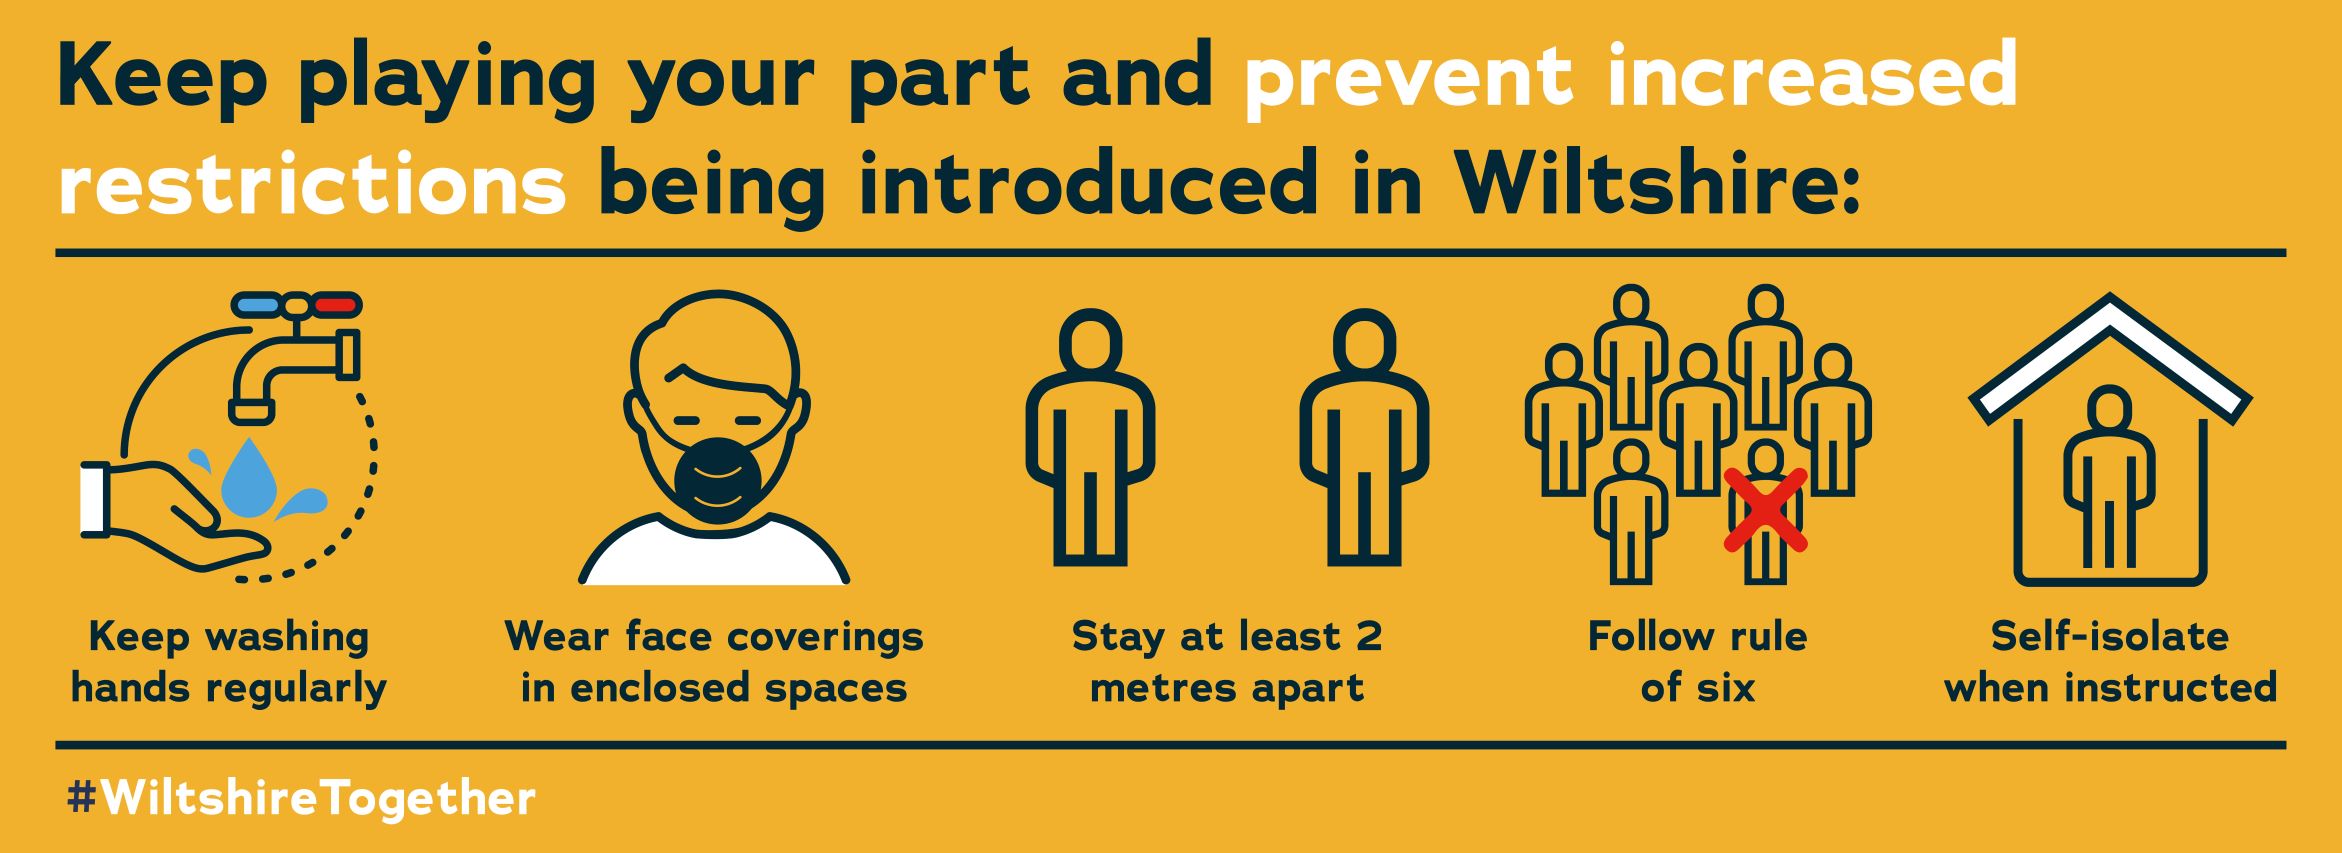 Community messaging for Wiltshire - Keep playing your part